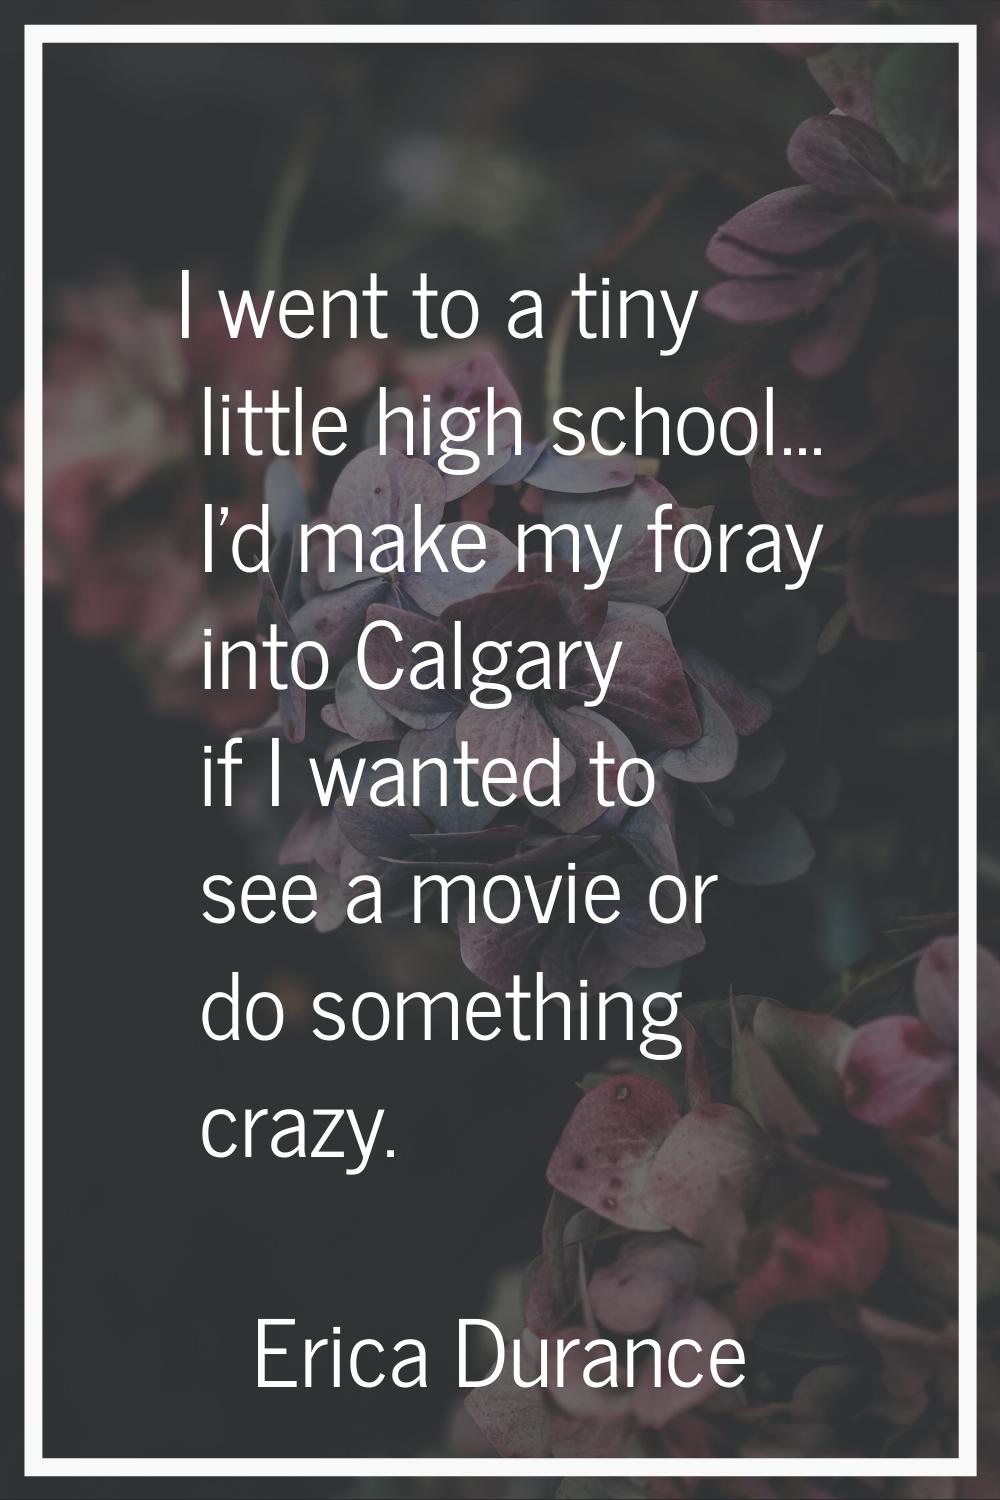 I went to a tiny little high school... I'd make my foray into Calgary if I wanted to see a movie or